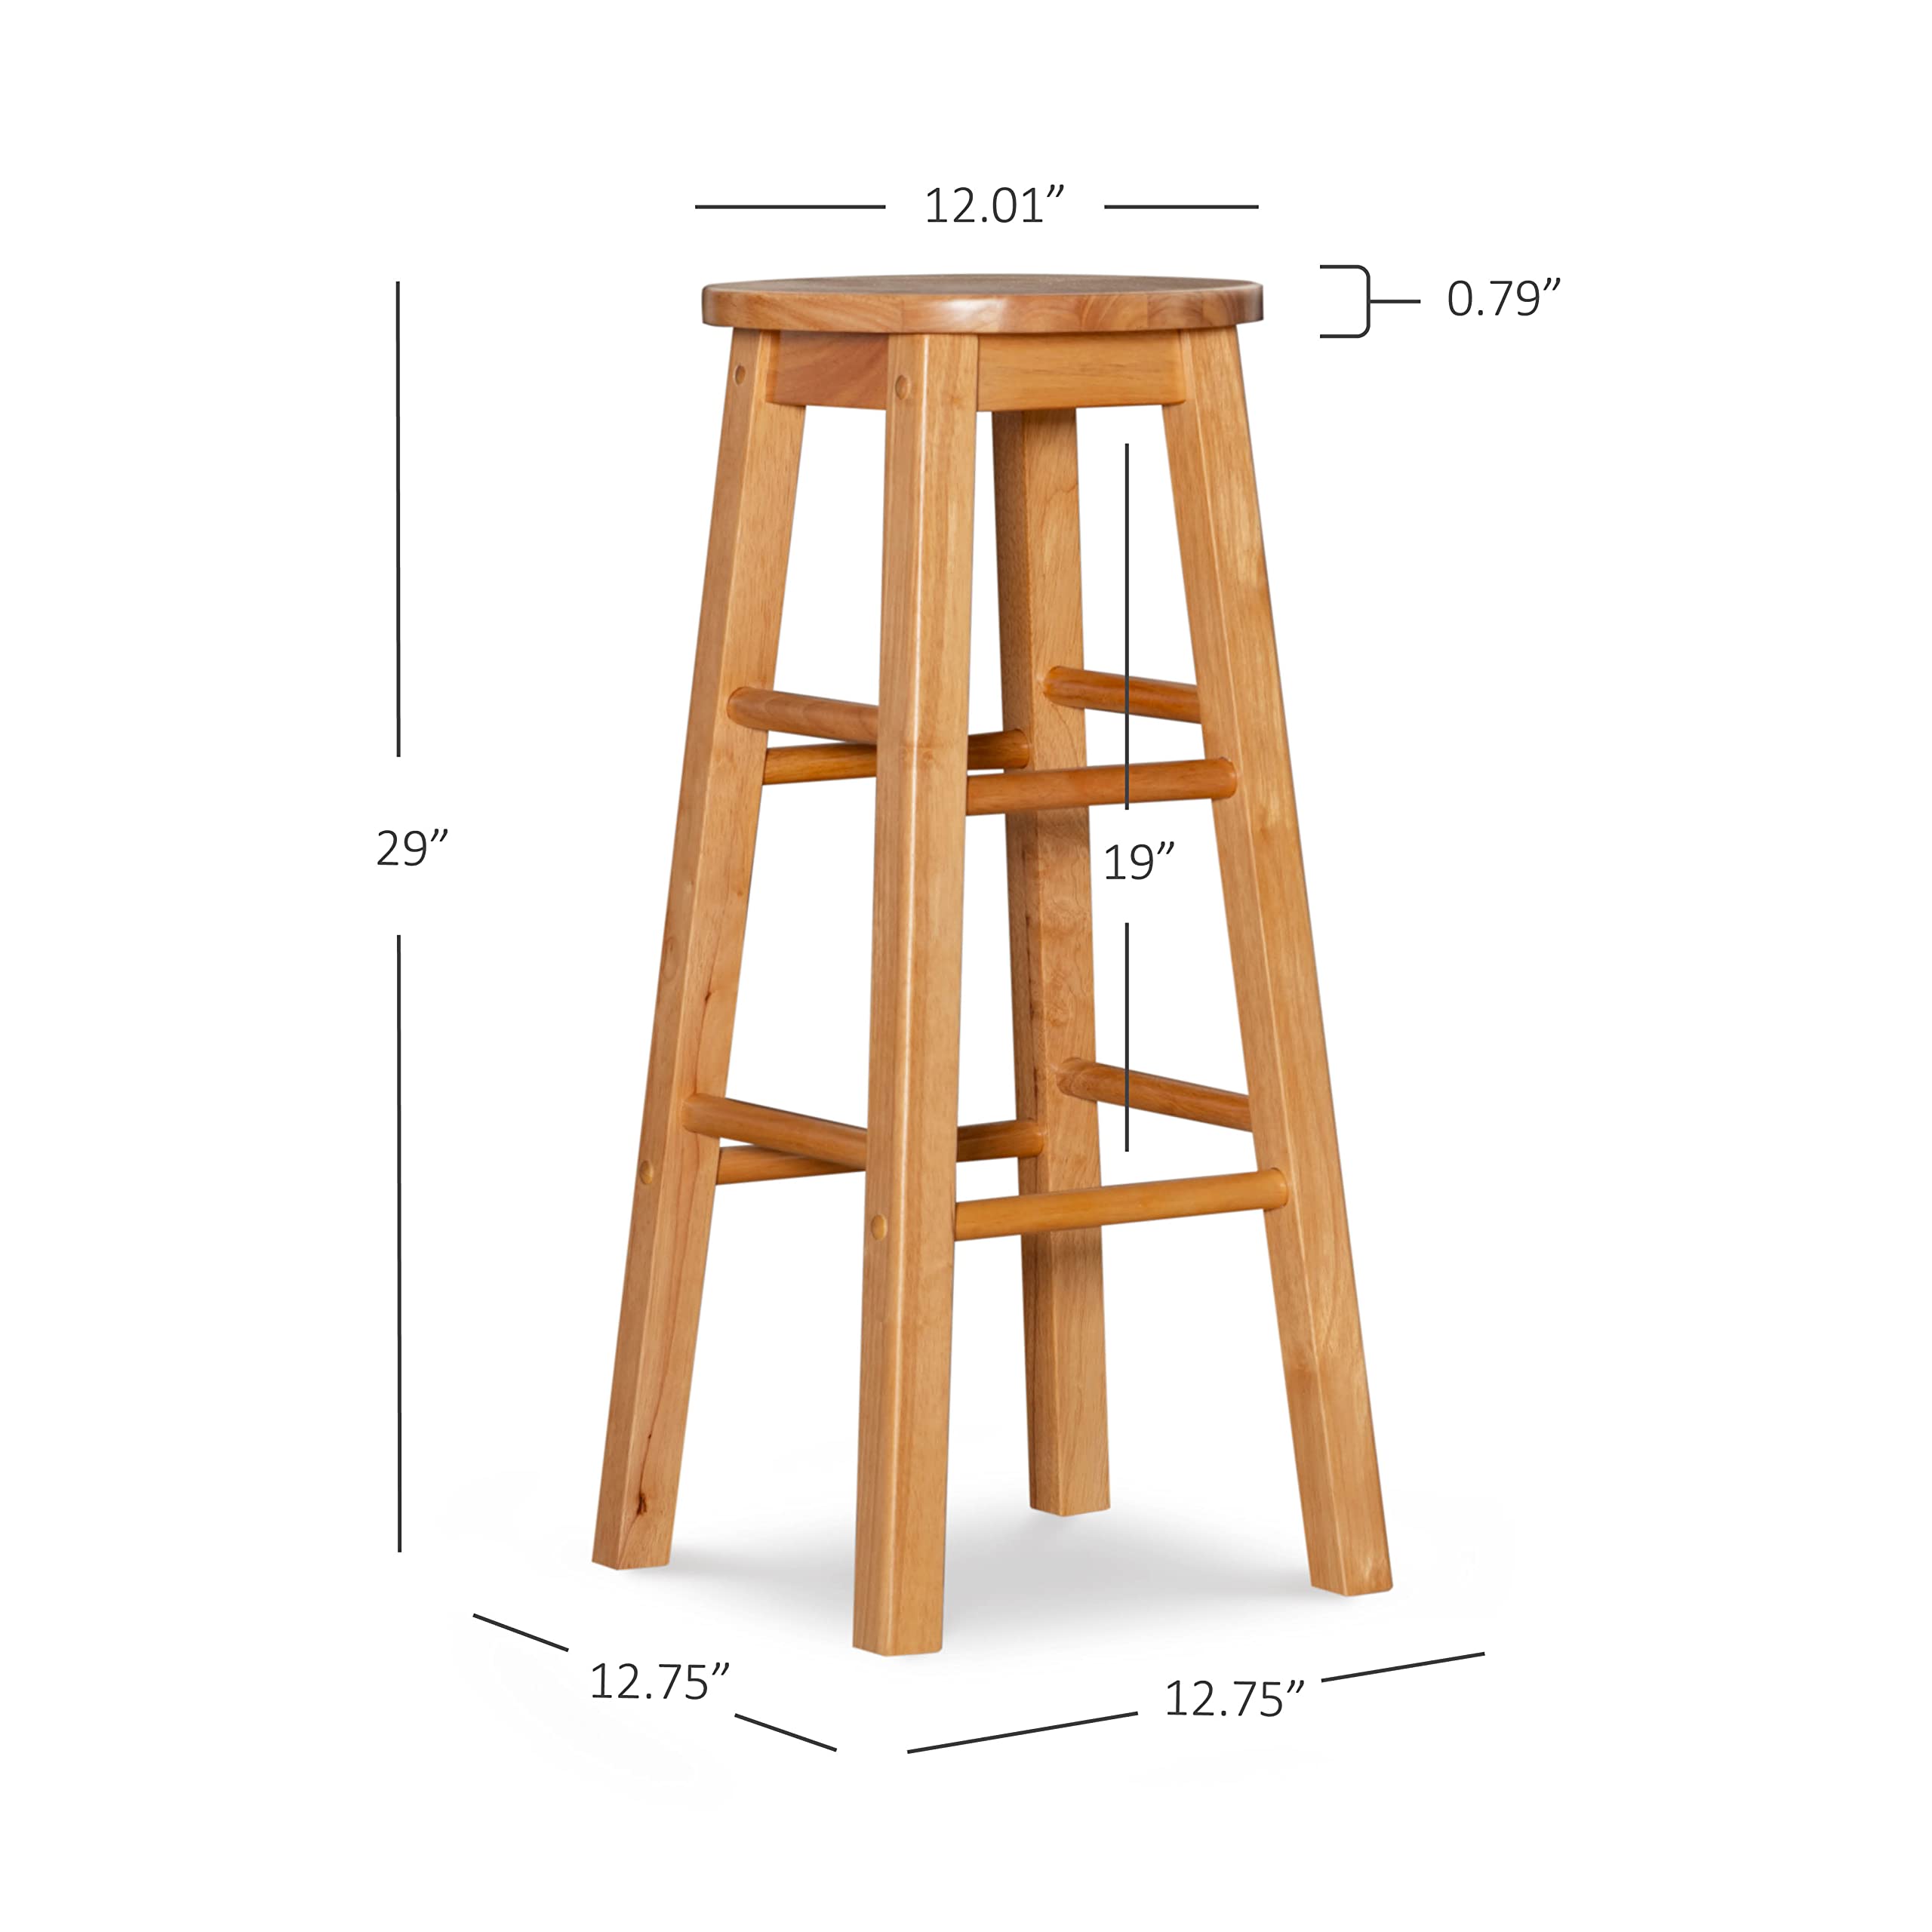  Barstool With Round Seat Natural Wooden Backless Chair Home Furniture